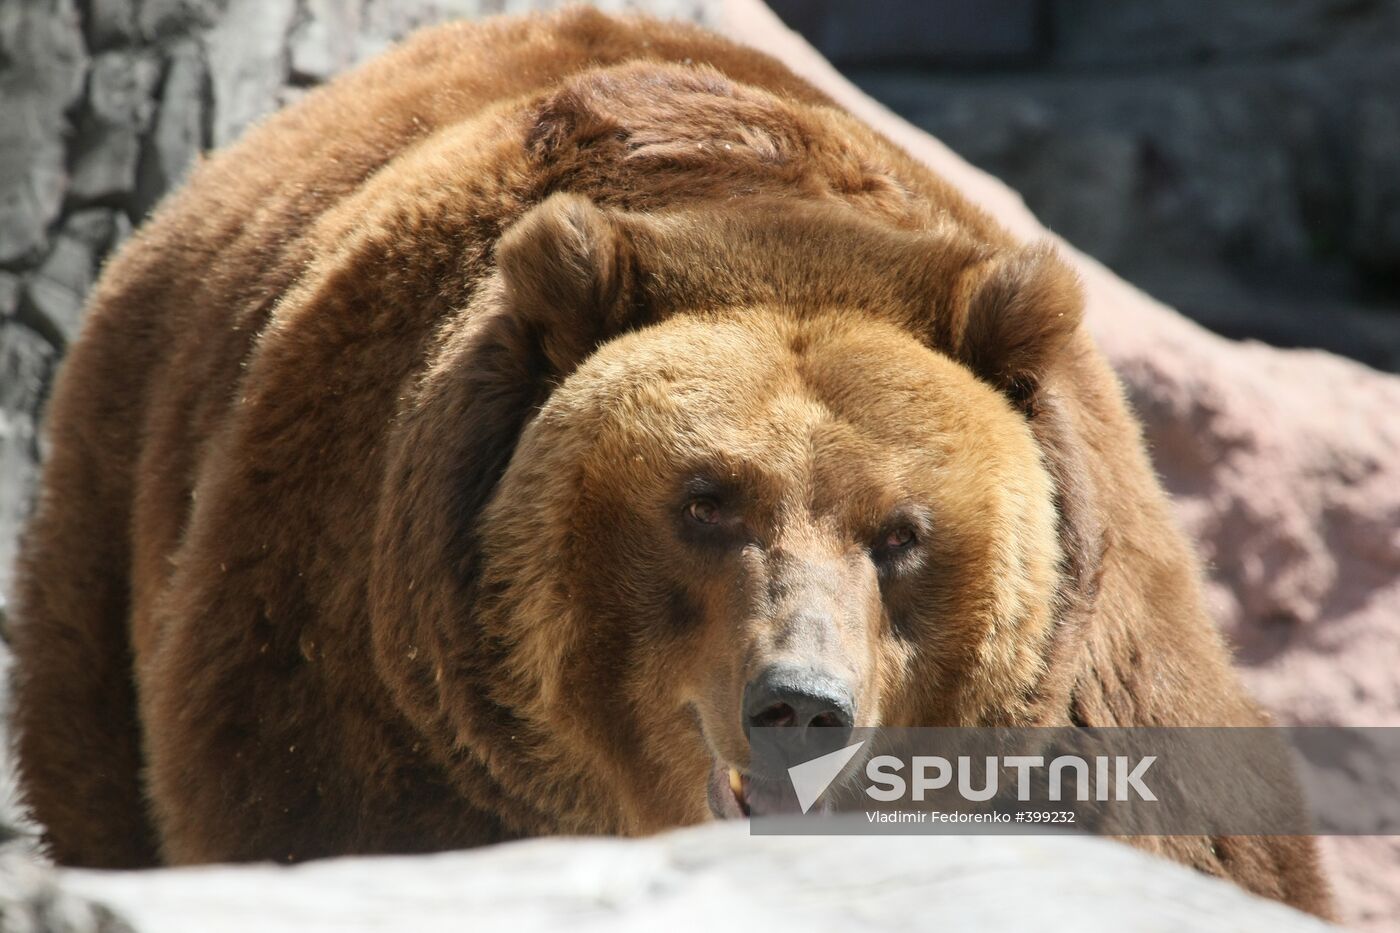 Brown bear in the Moscow Zoo